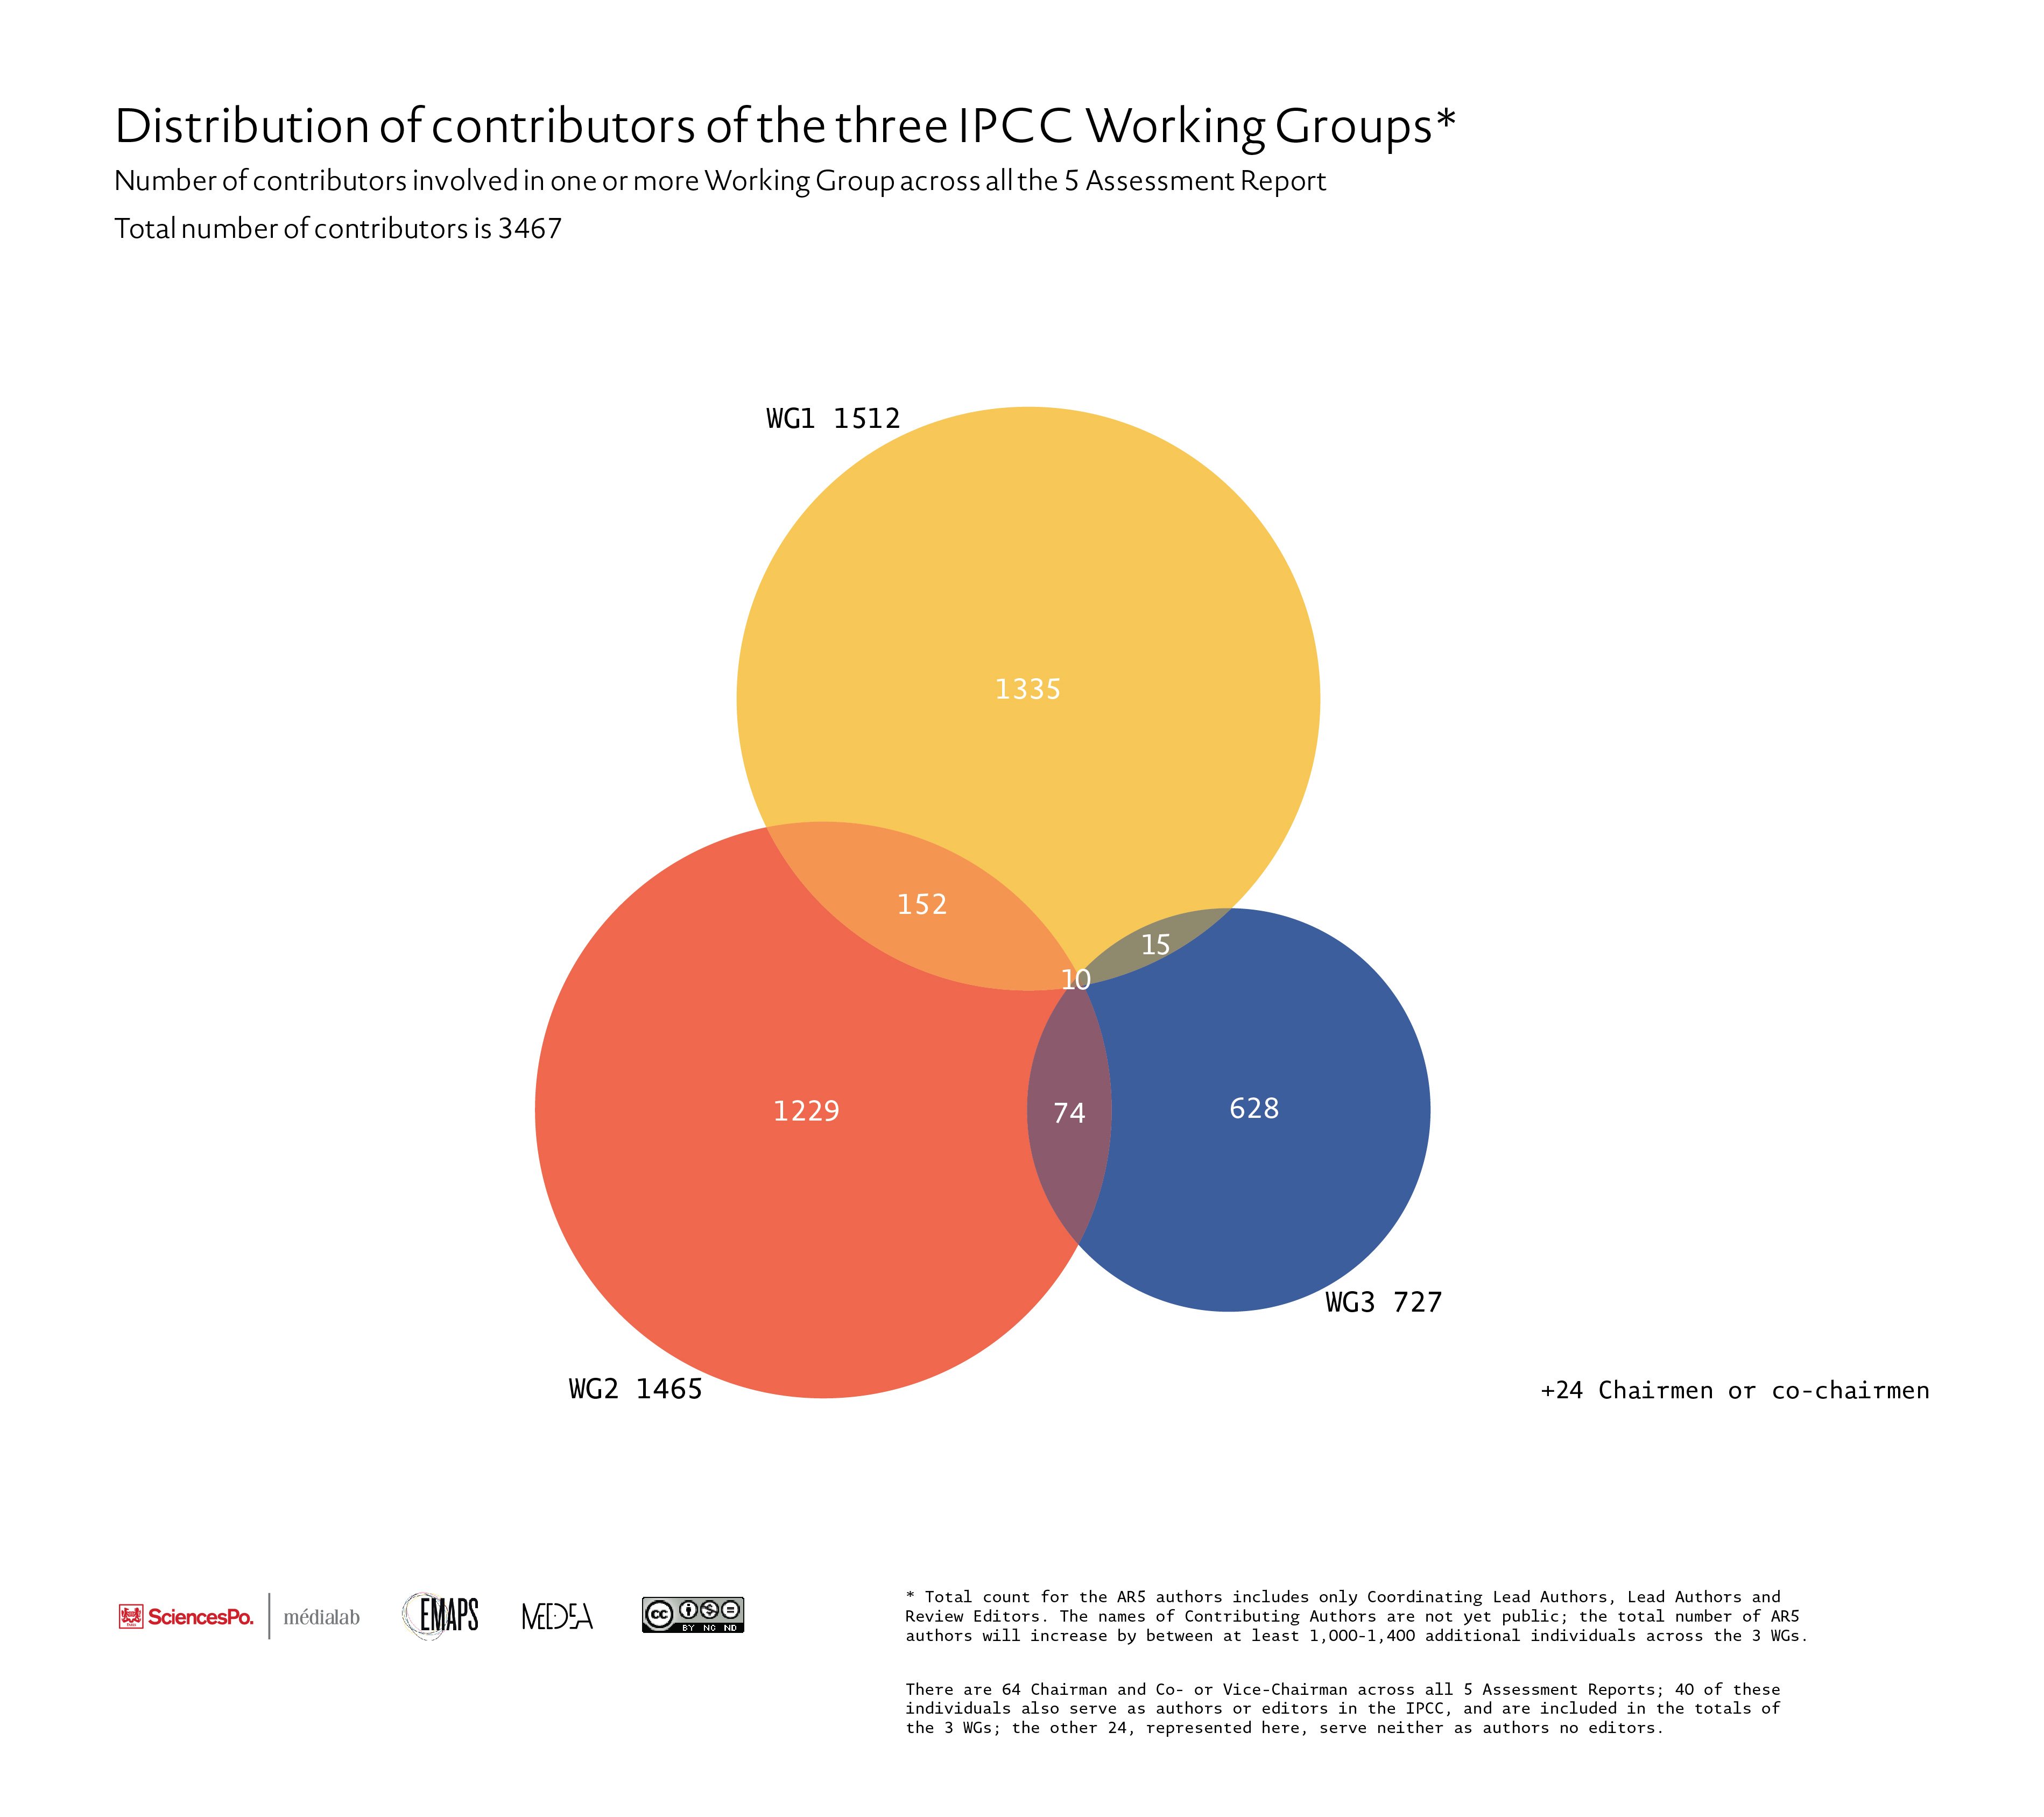 Fig. 4 Distribution of contributors of the three IPCC Working Groups